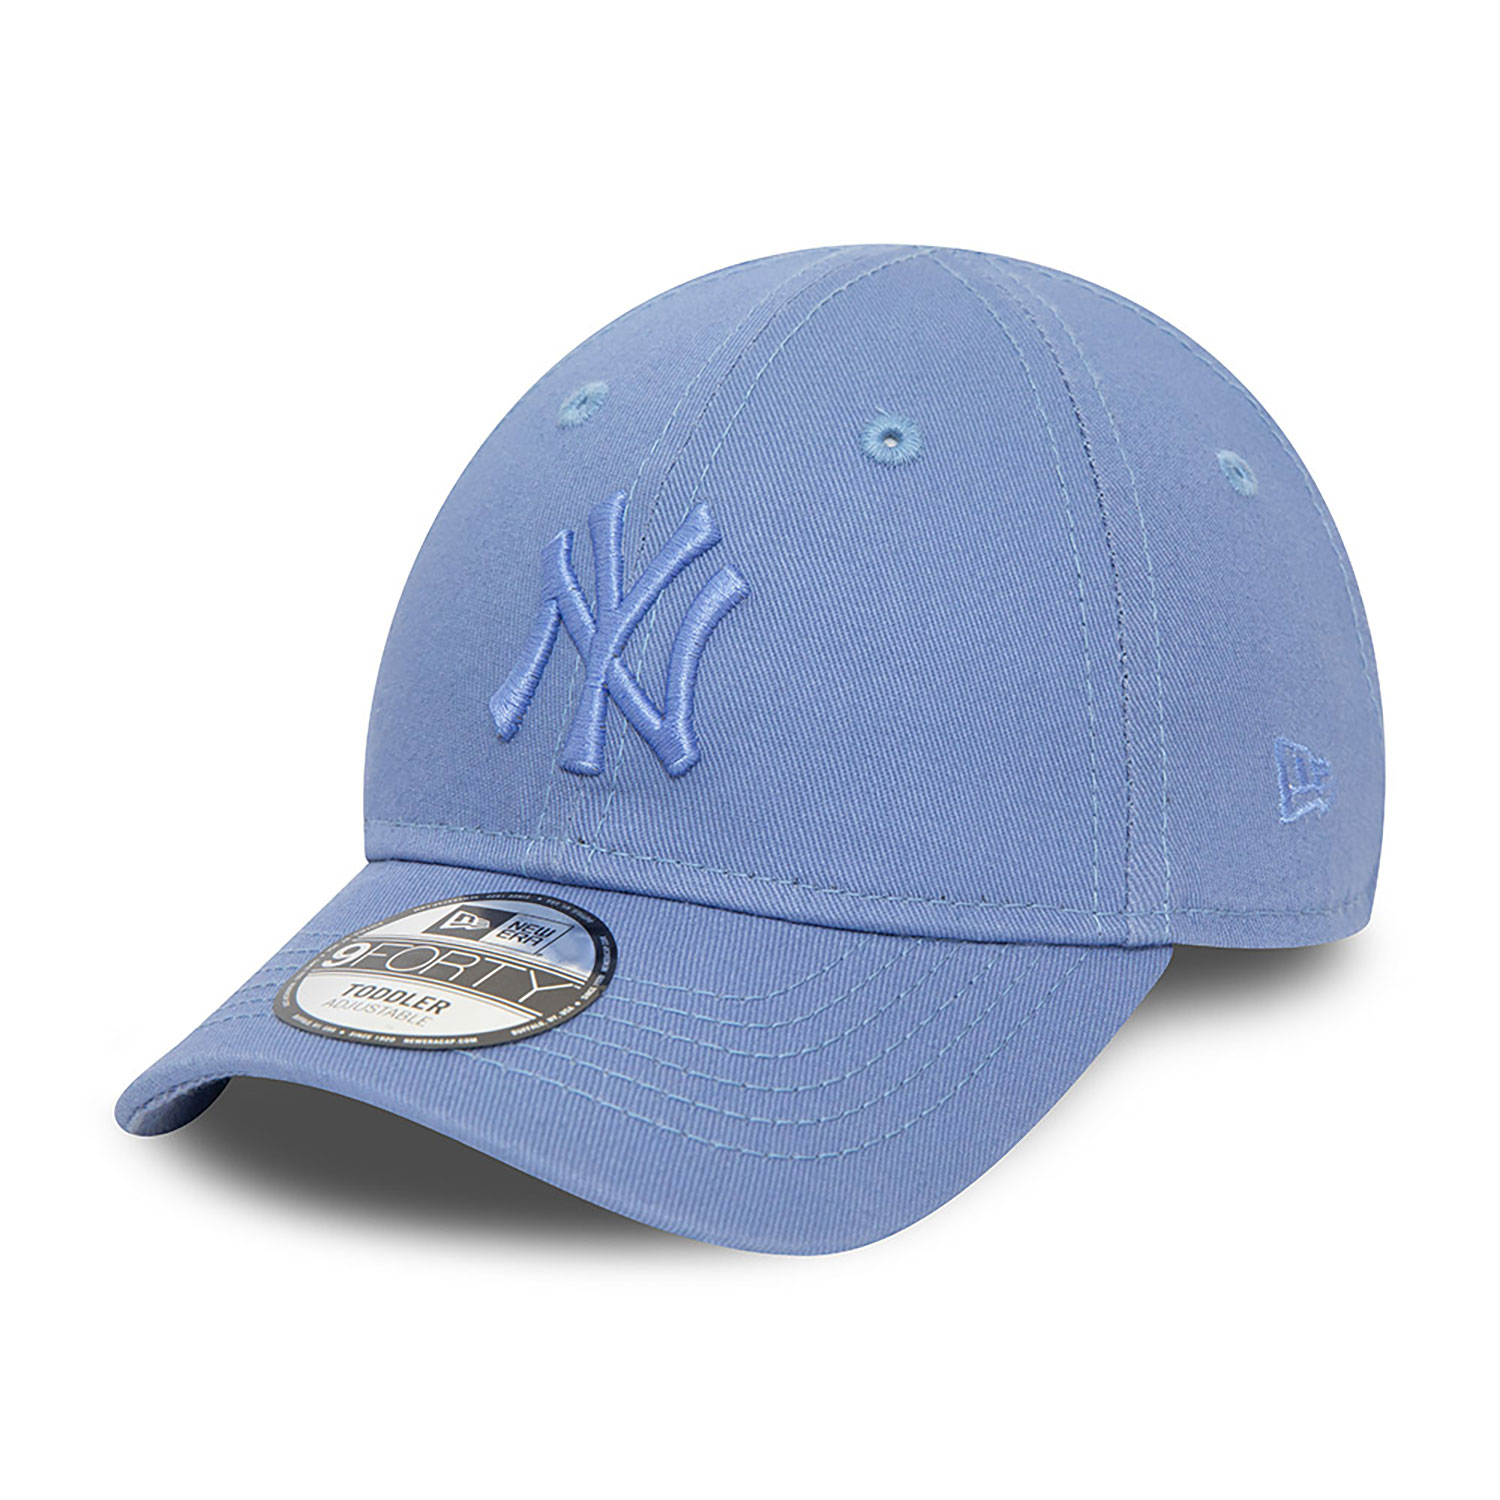 New York Yankees Toddler League Essential Blue 9FORTY Adjustable Cap